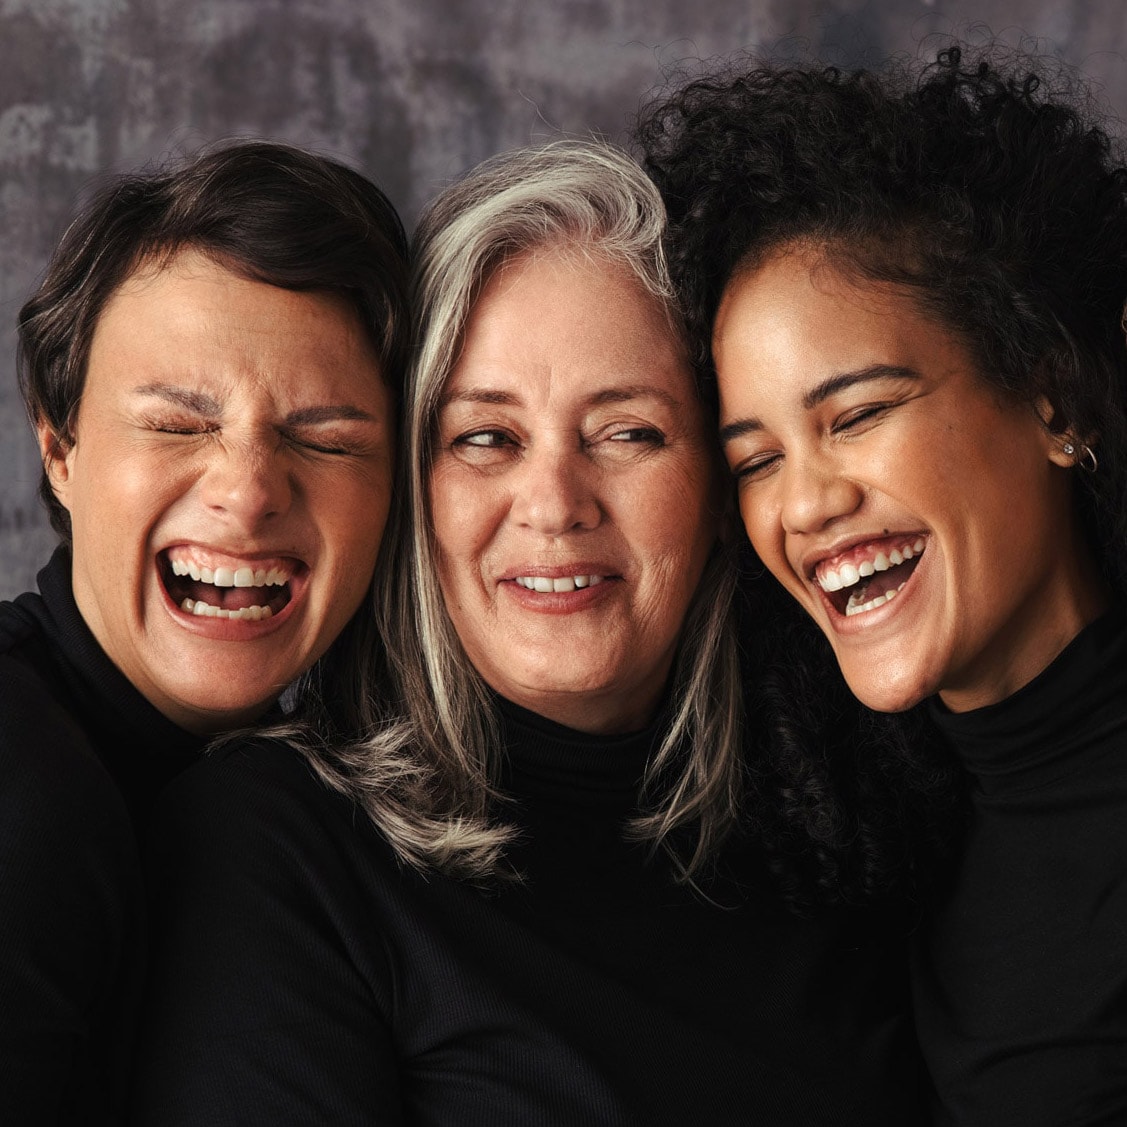 Three women celebrate relief from bladder control issues and incontinence after treatments using Forma V and V Tone